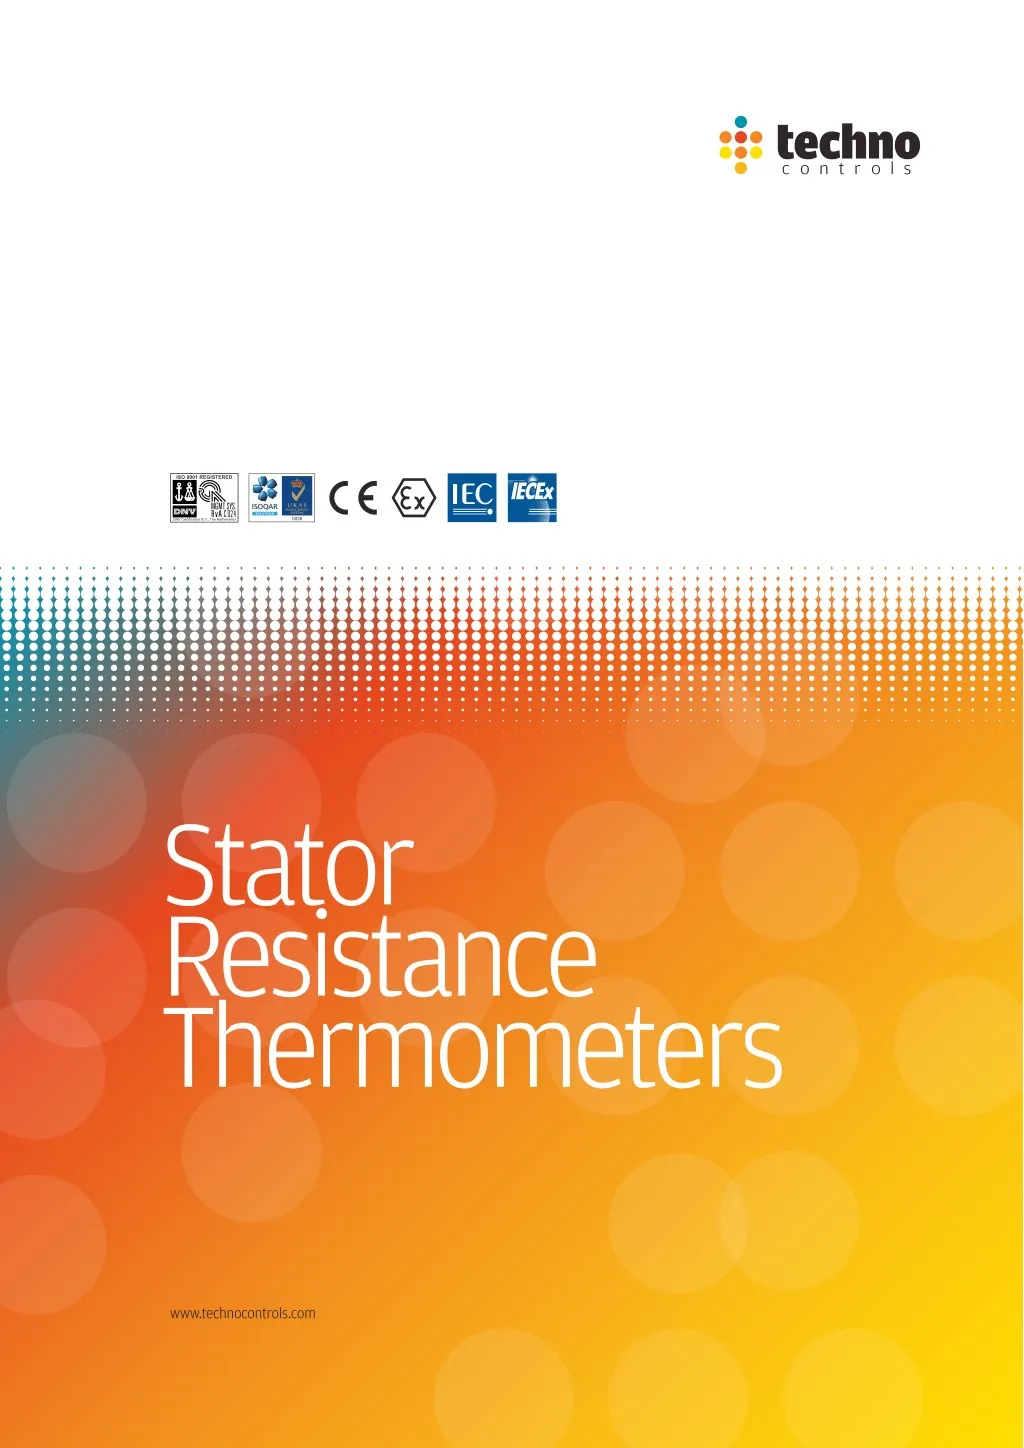 stator resistance thermometers